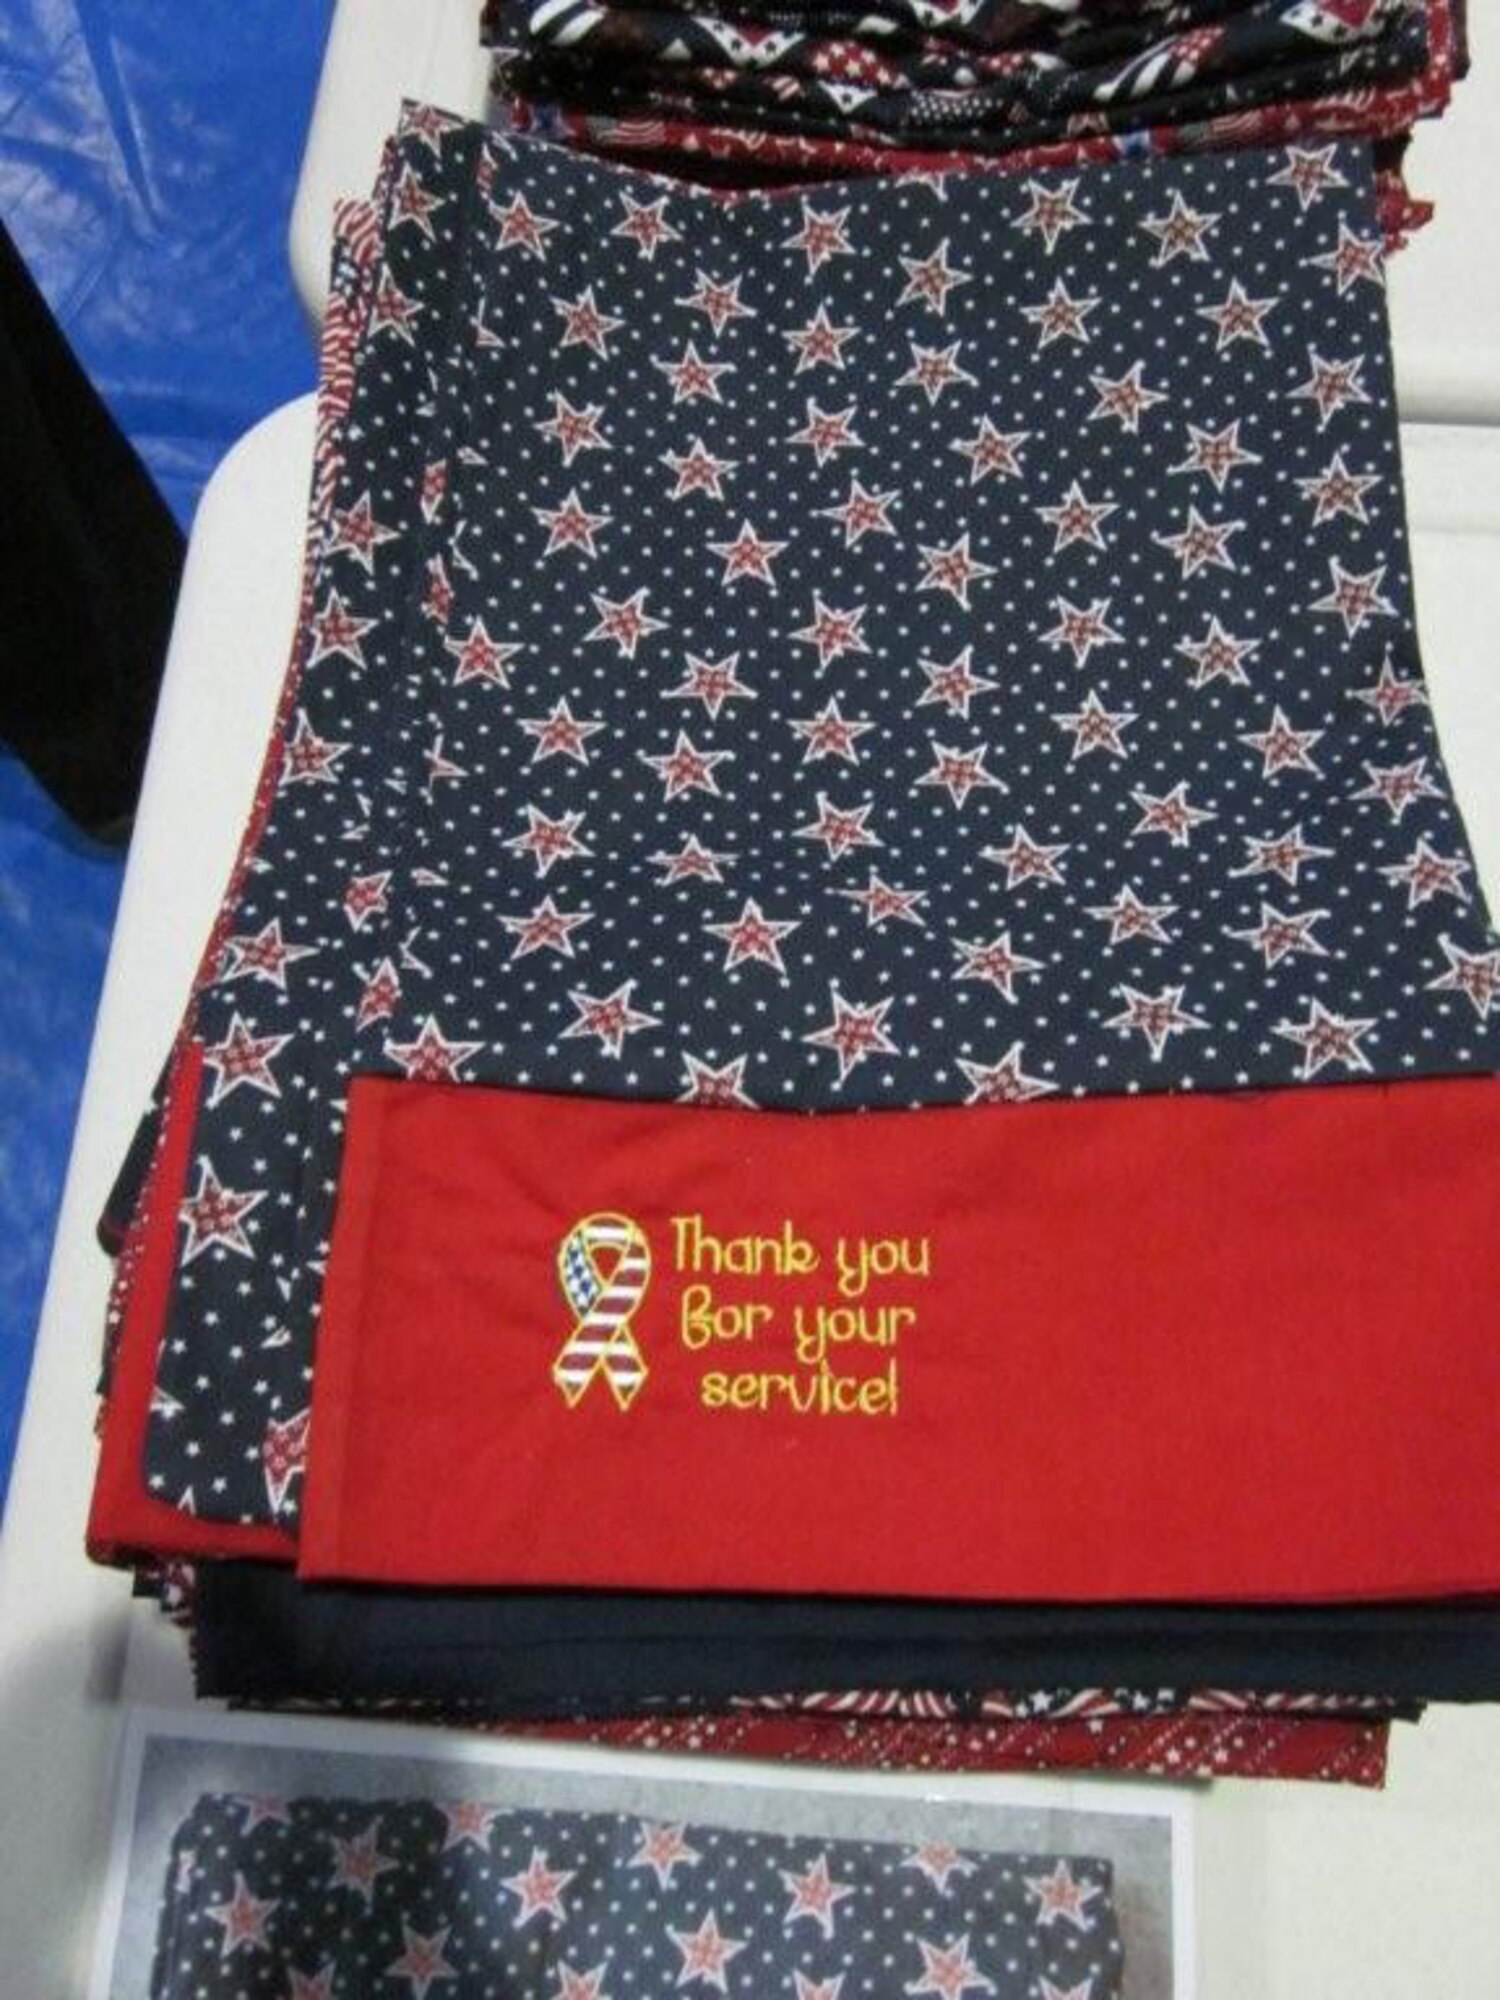 An embroidered handmade pillow case is the finishing touch for care packages designed to thank Wounded Warriors. Staff members in the Office of Air Force Reserve, Pentagon, presented the care packages to Wounded Warriors in the Walter Reed Hospital on Dec. 3 and Dec. 7, 2010. (U.S. Air Force photo/Col. Bob Thompson)